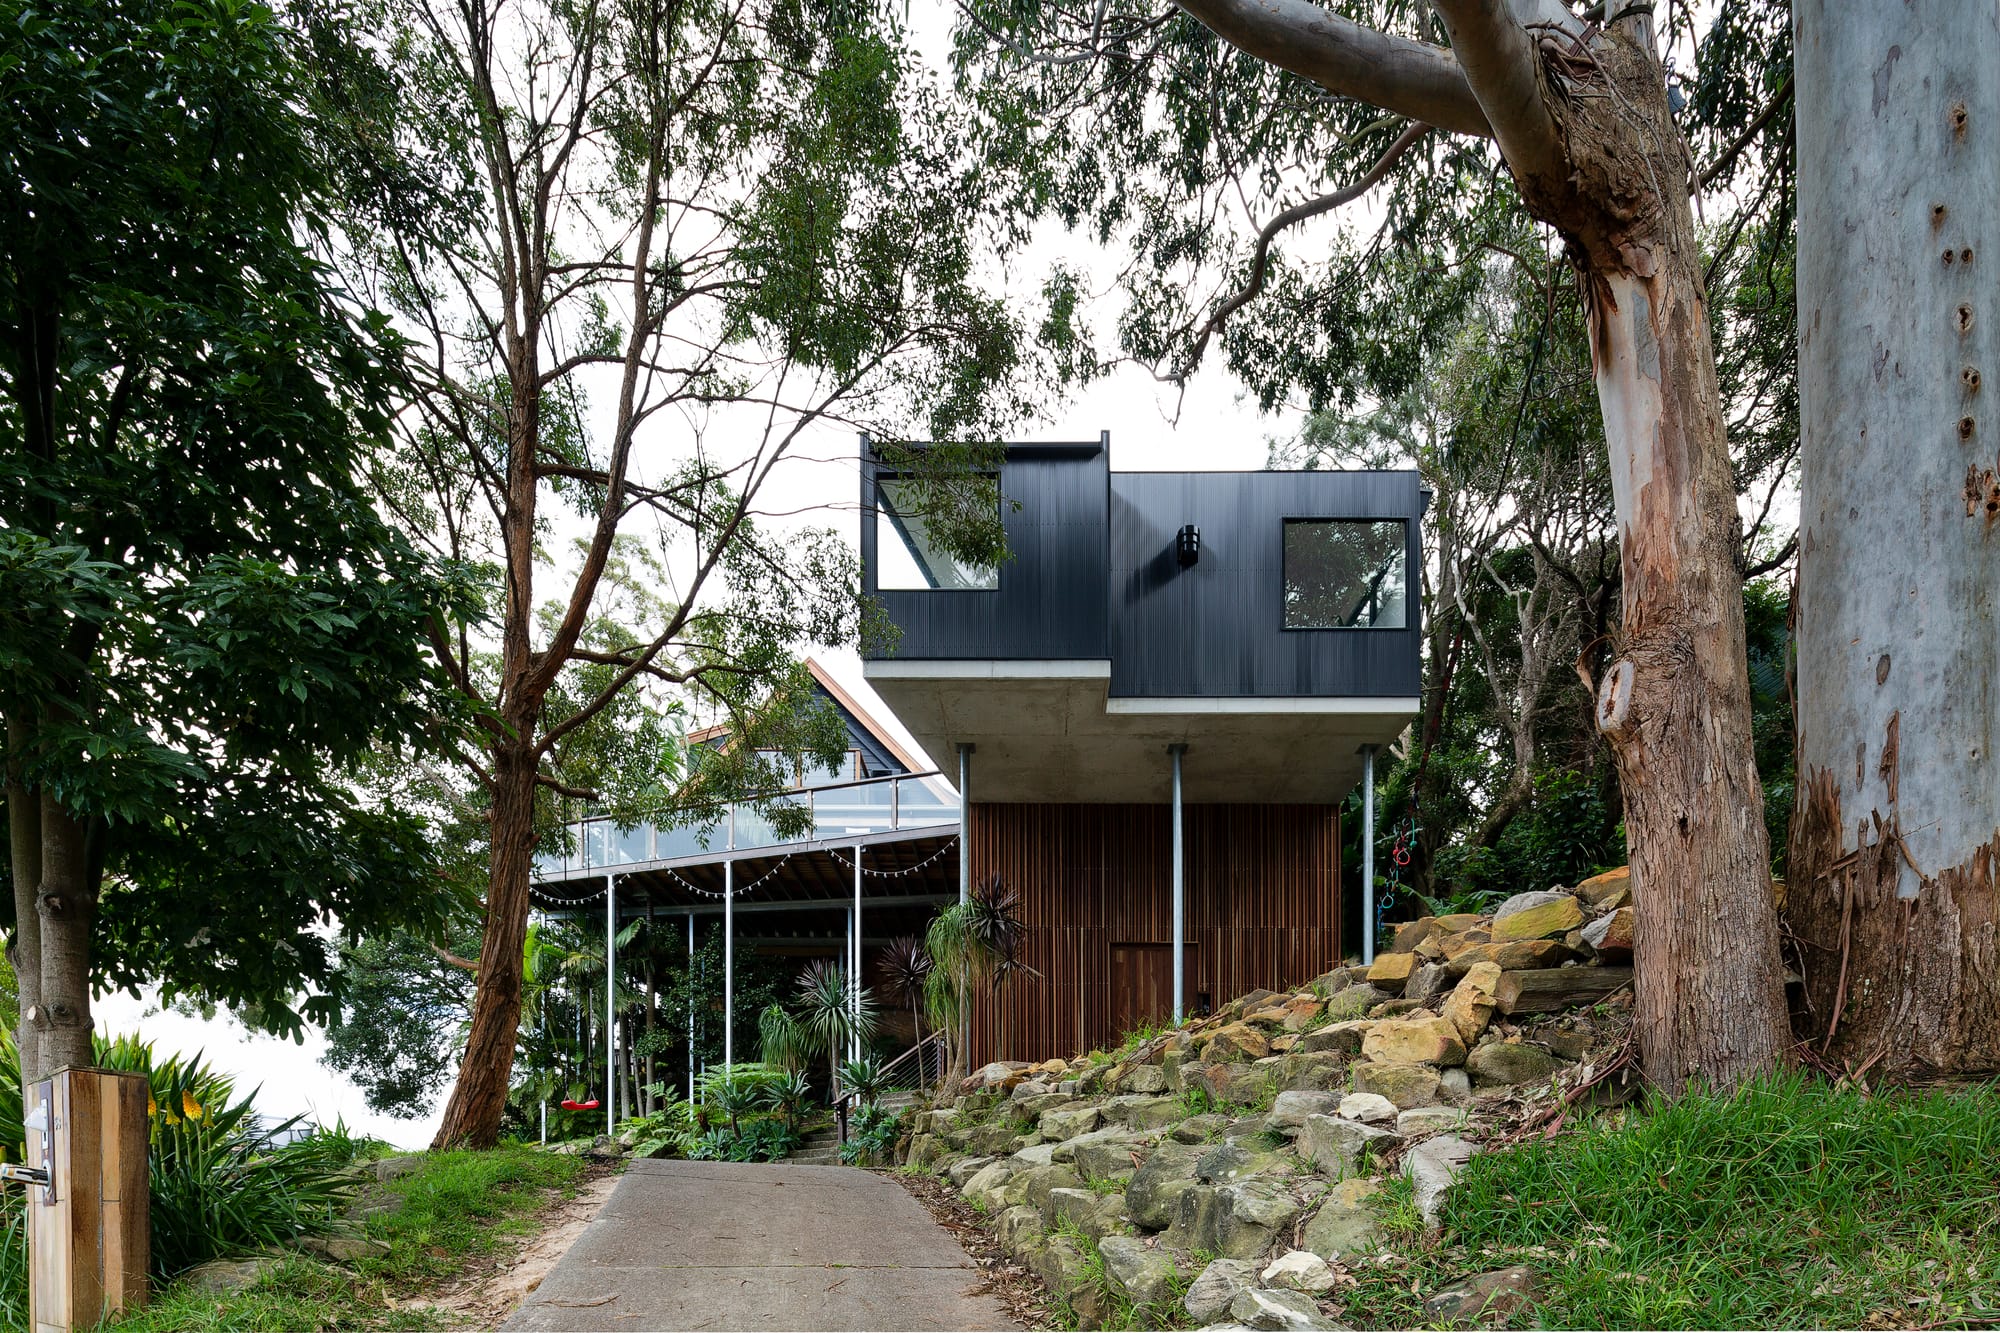 Tree House by North By North. Photography by Simon Whitbread. Path leading up to double storey timber clad home. Lots of trees and greenery around the home.